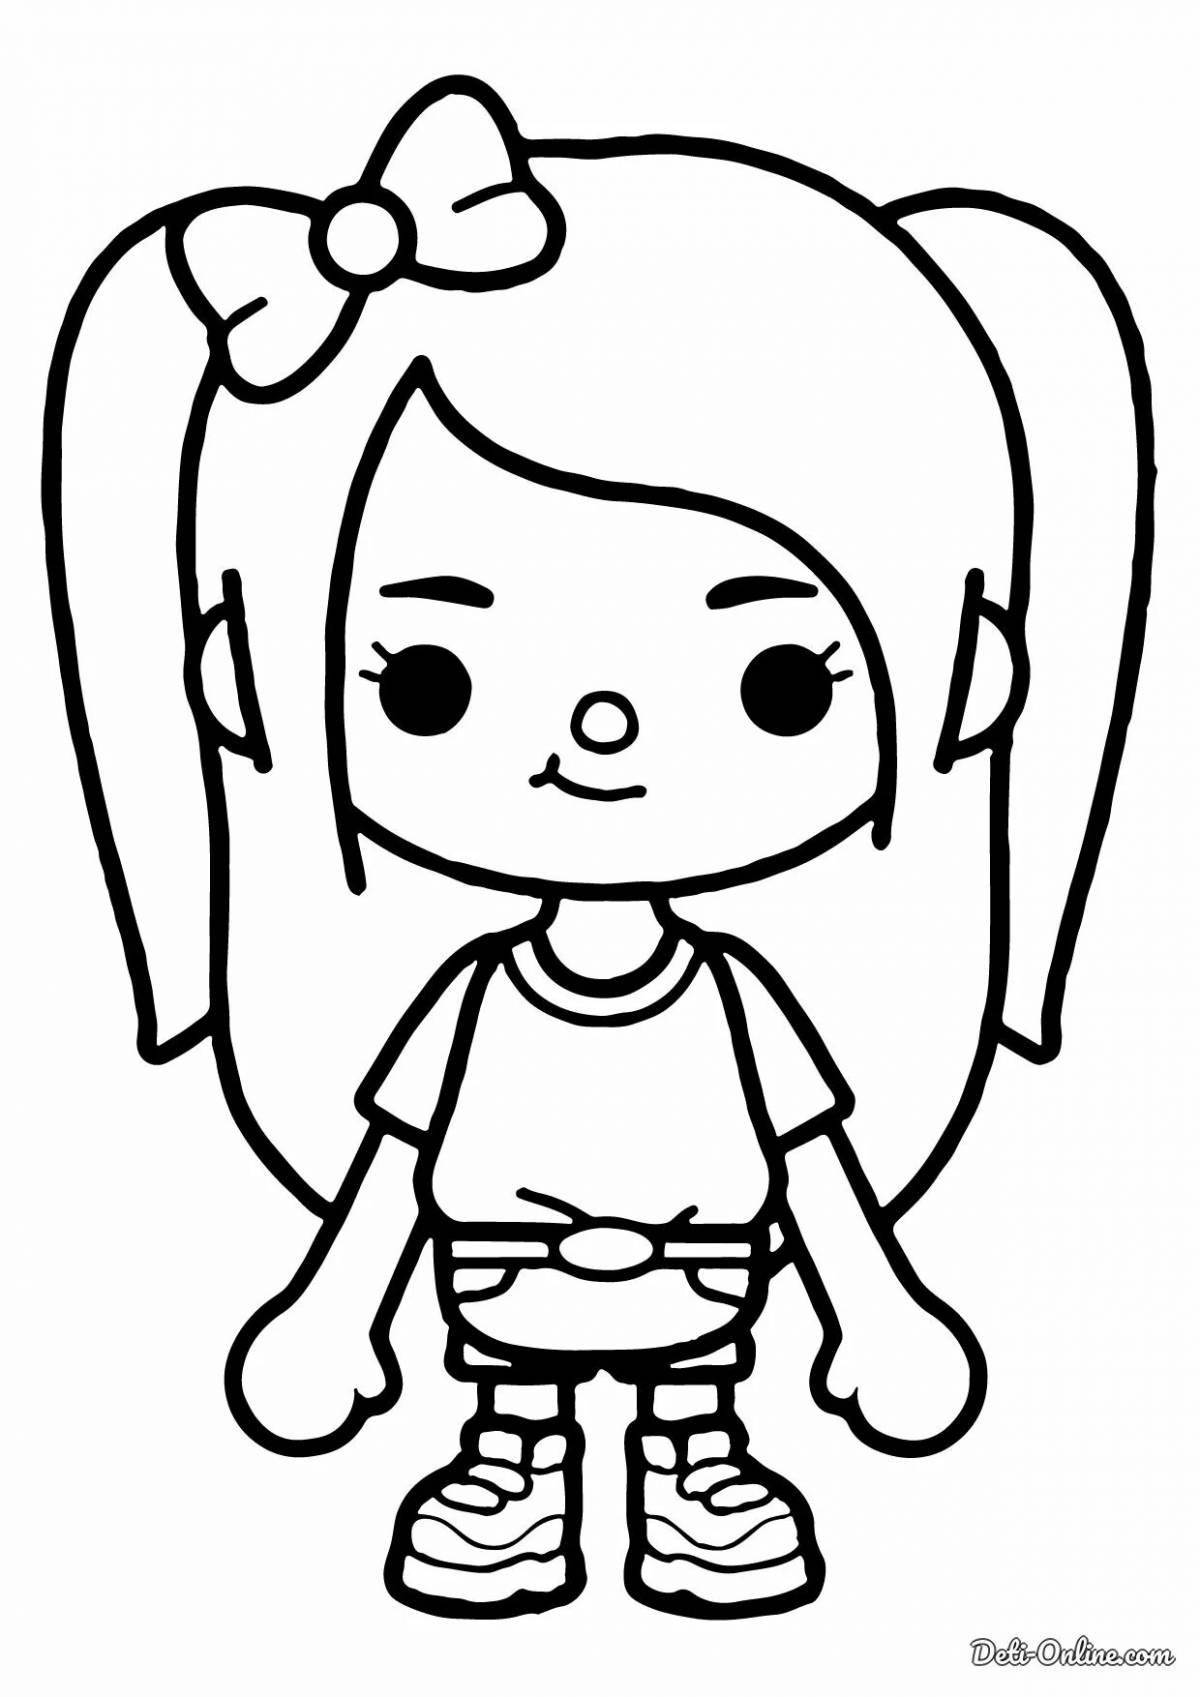 Dazzling white current side coloring page